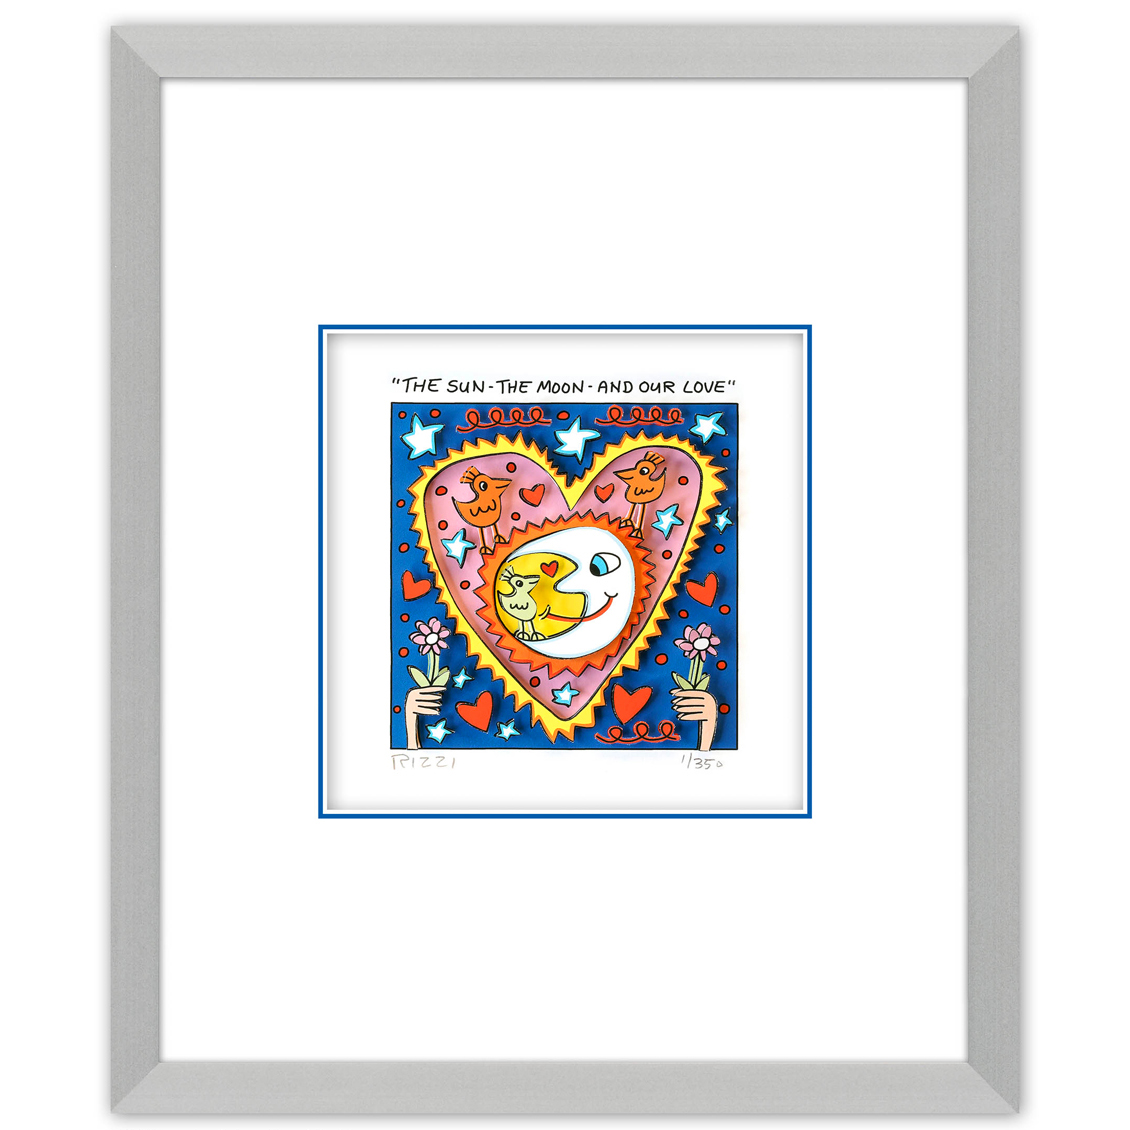 James Rizzi: "THE SUN – THE MOON – AND OUR LOVE" 3D-Grafik [AP27/50] 